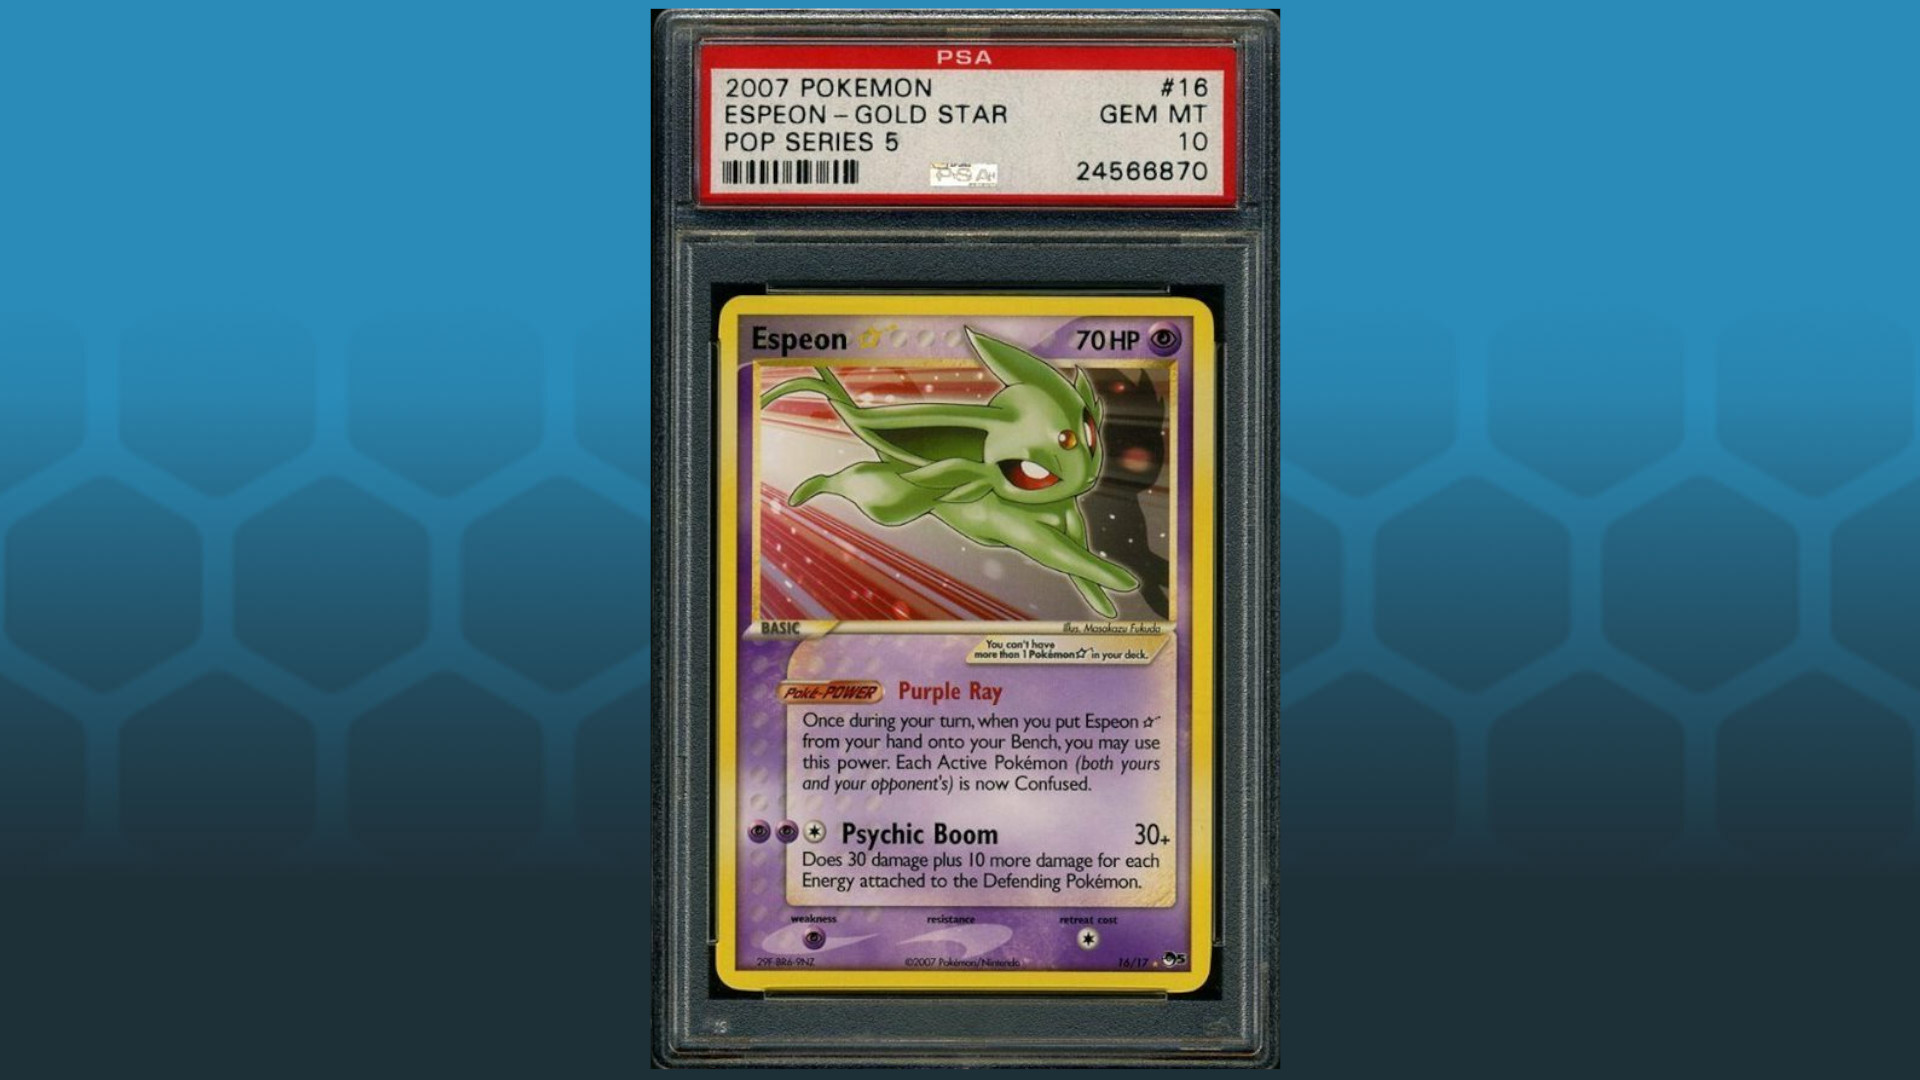 The Top 5 Most Expensive Pokémon Cards Ever